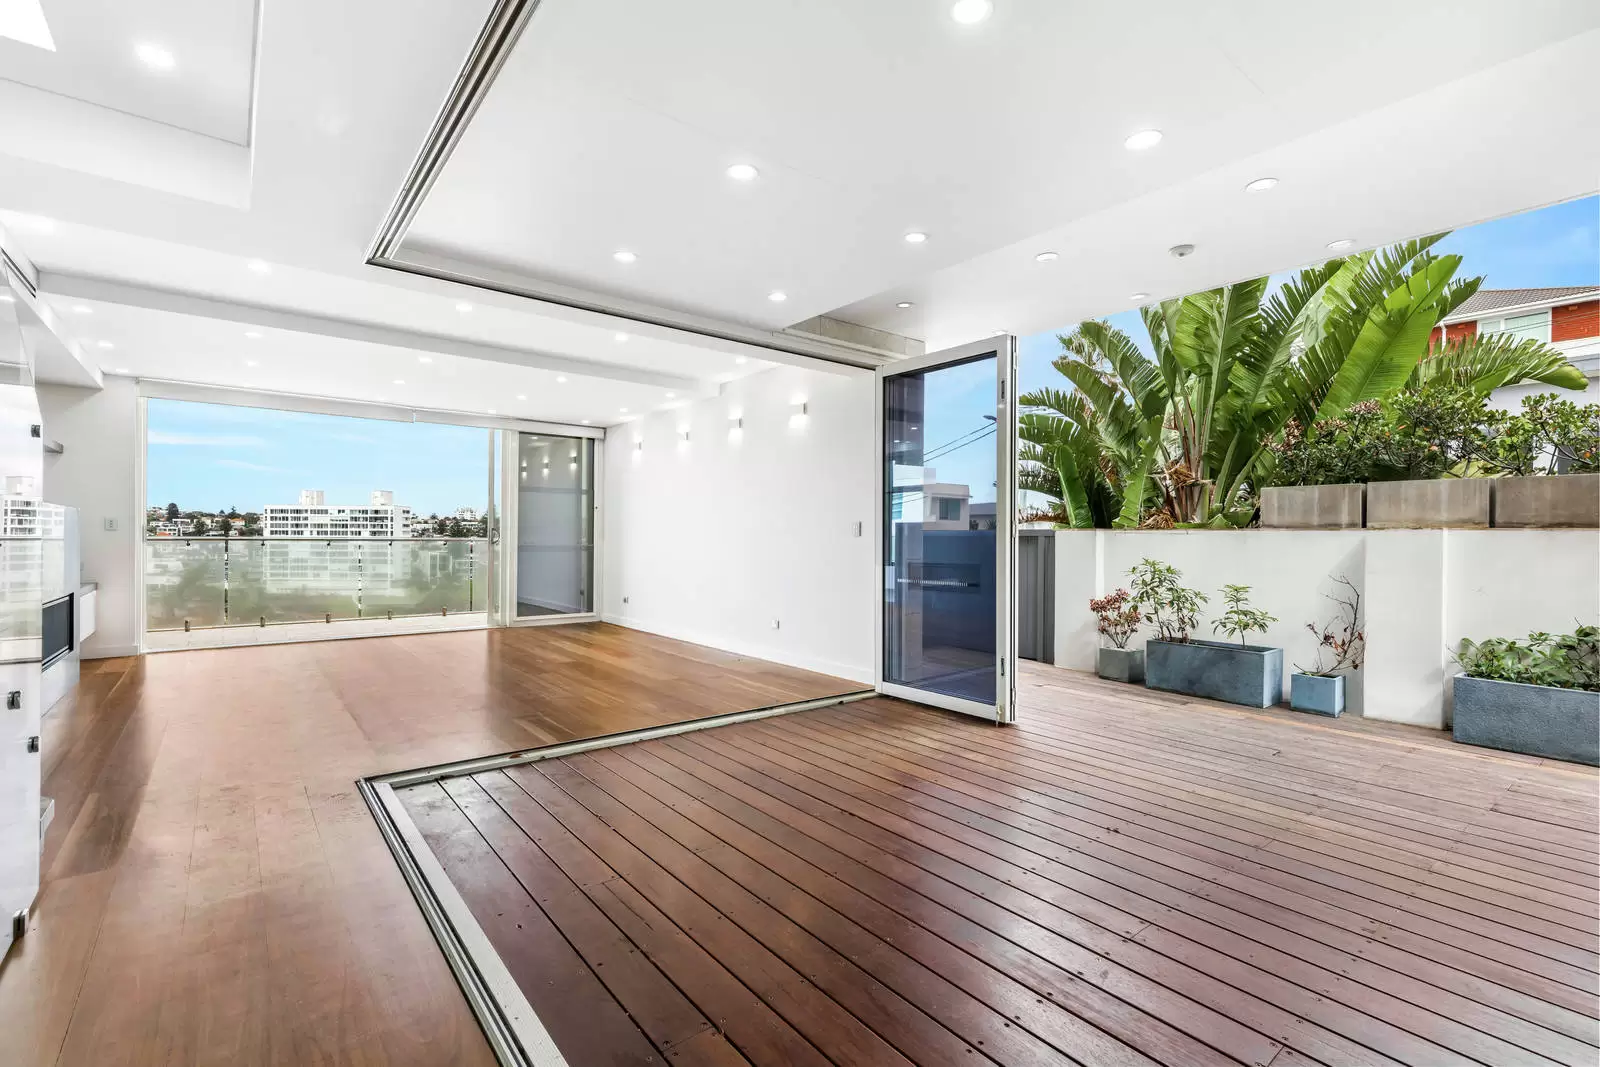 31 Macondald Street, Vaucluse For Lease by Sydney Sotheby's International Realty - image 2